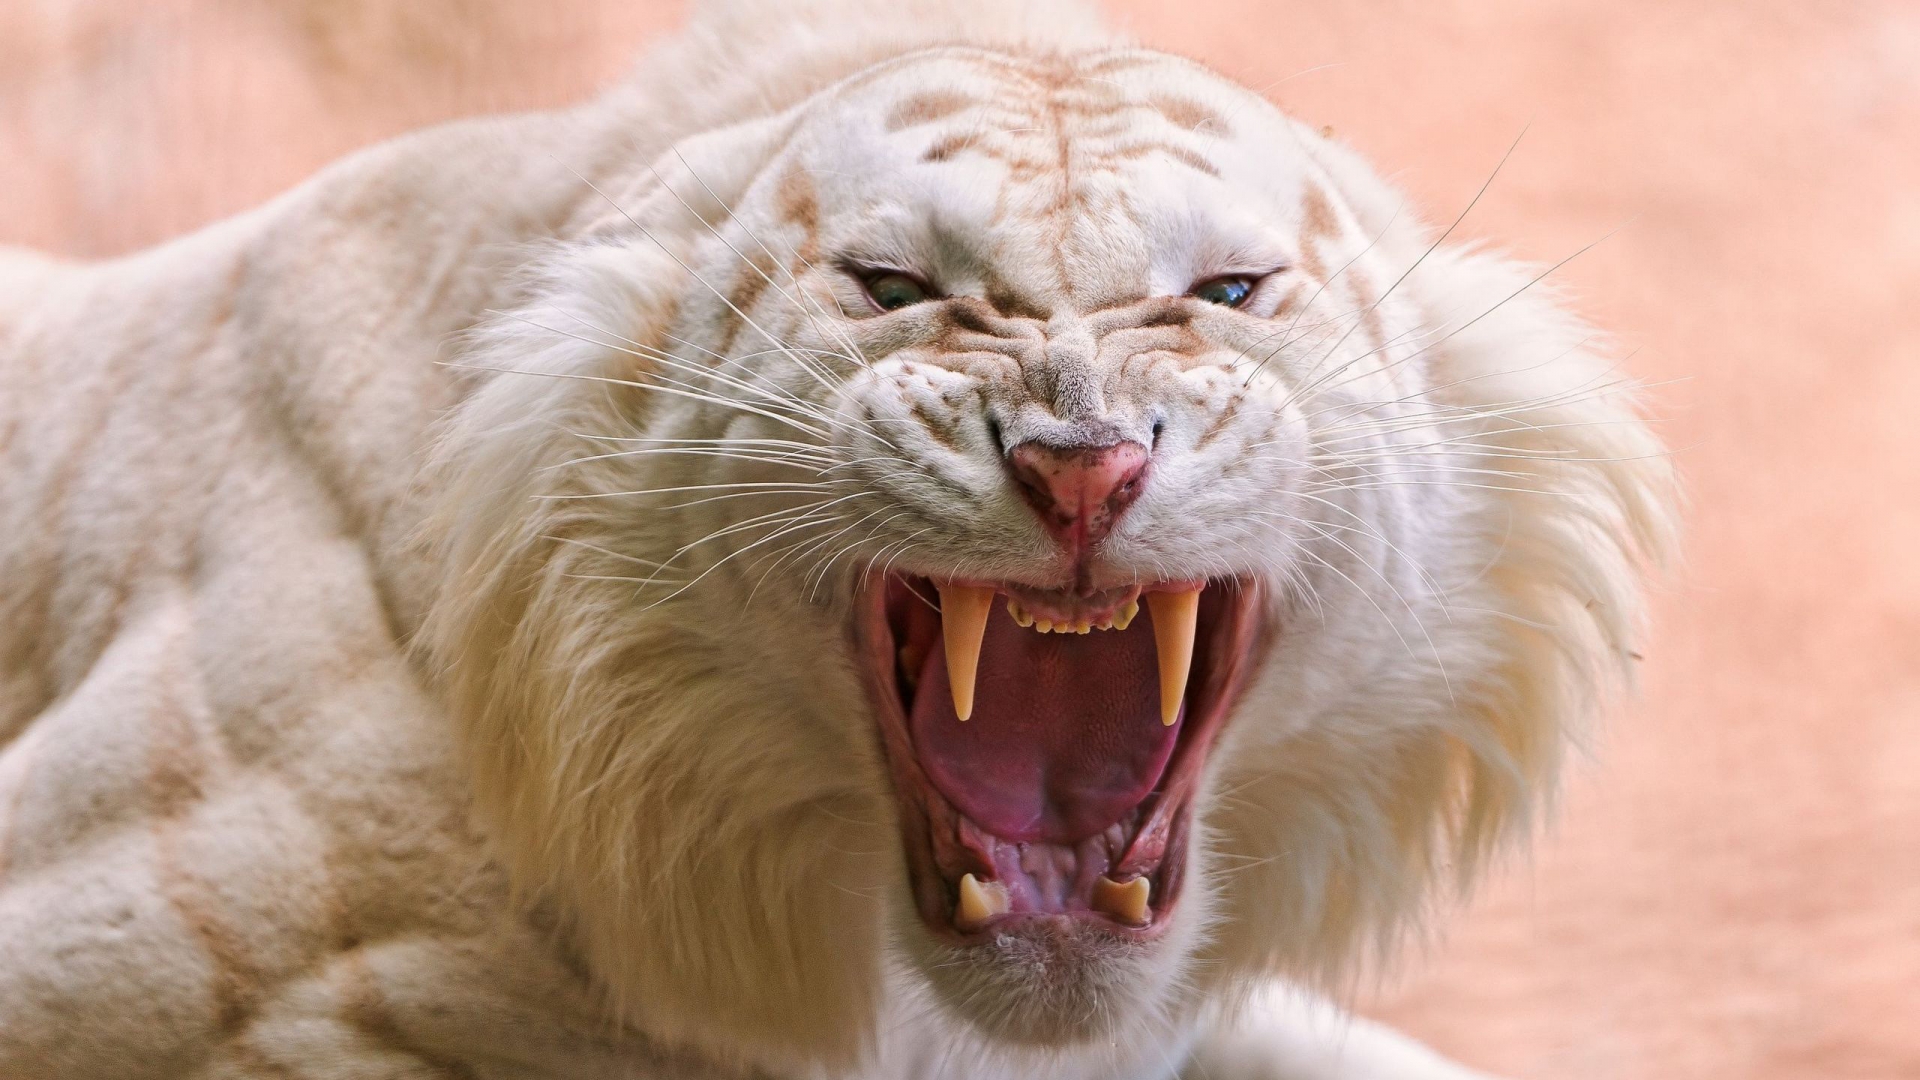 Angry white tiger for 1920 x 1080 HDTV 1080p resolution